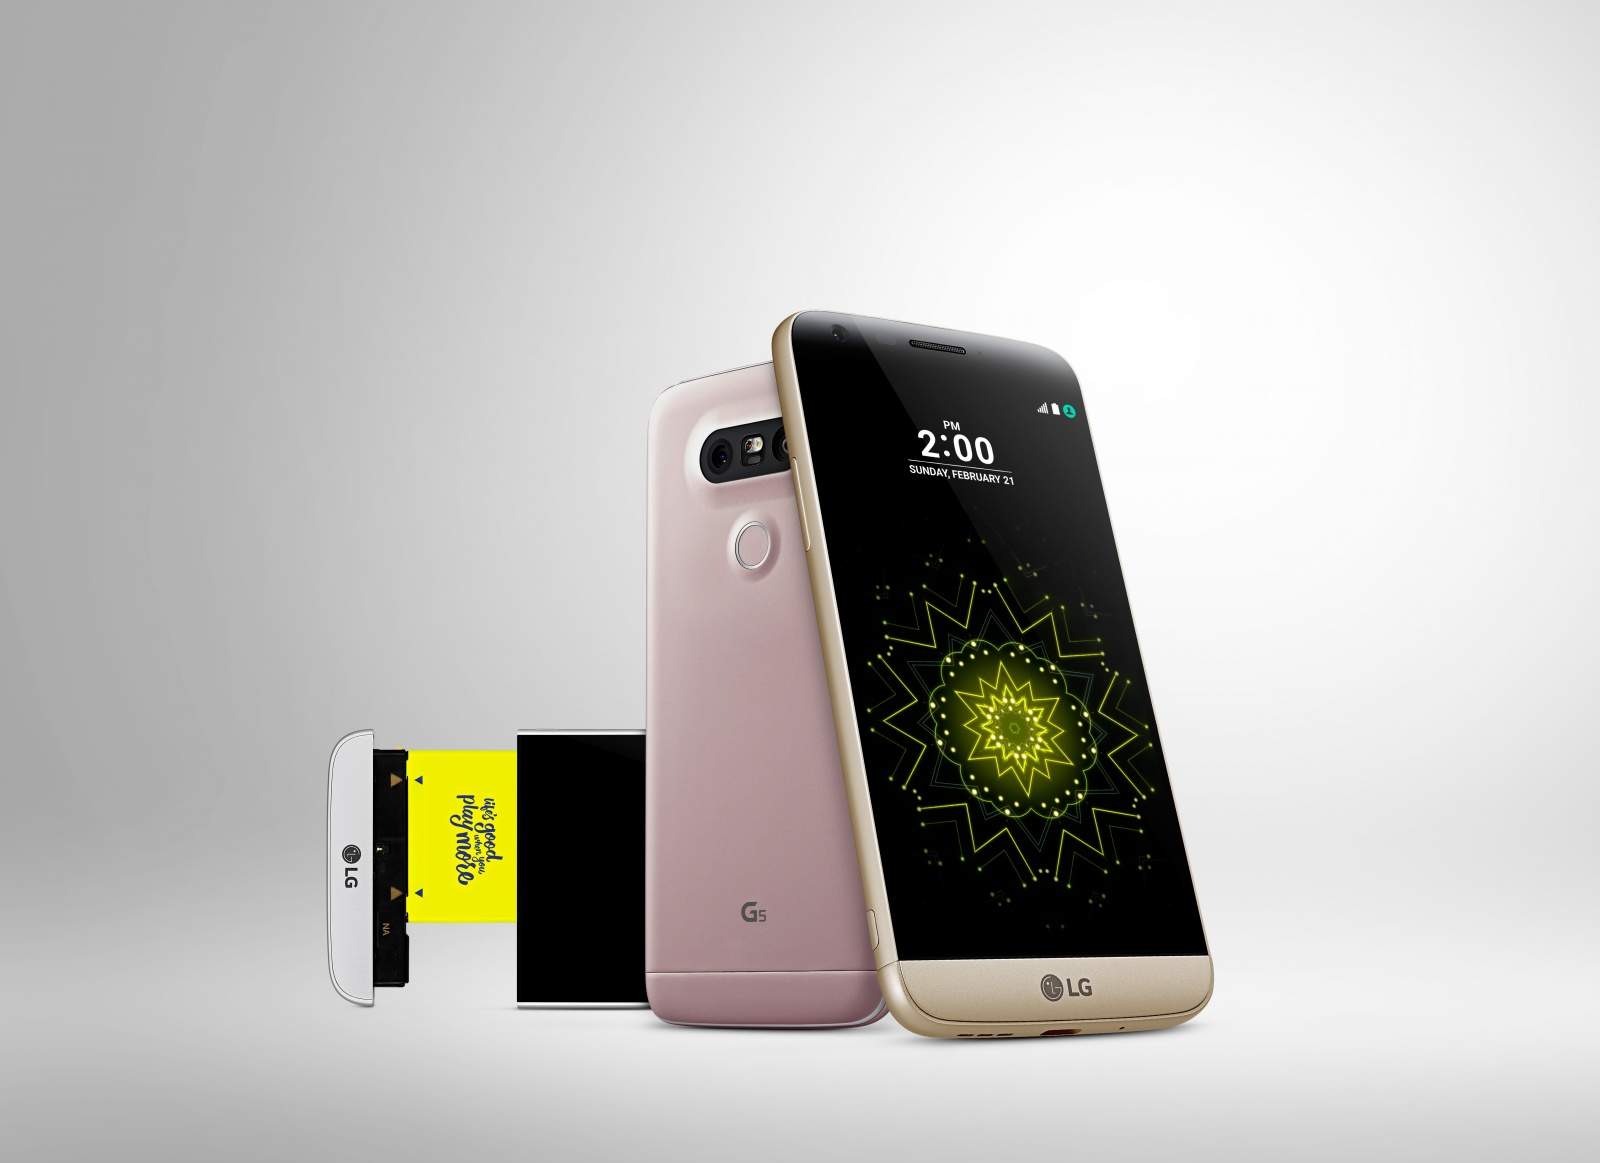 The LG G5 and its 'friends' are soon coming to the US. Photo: LG